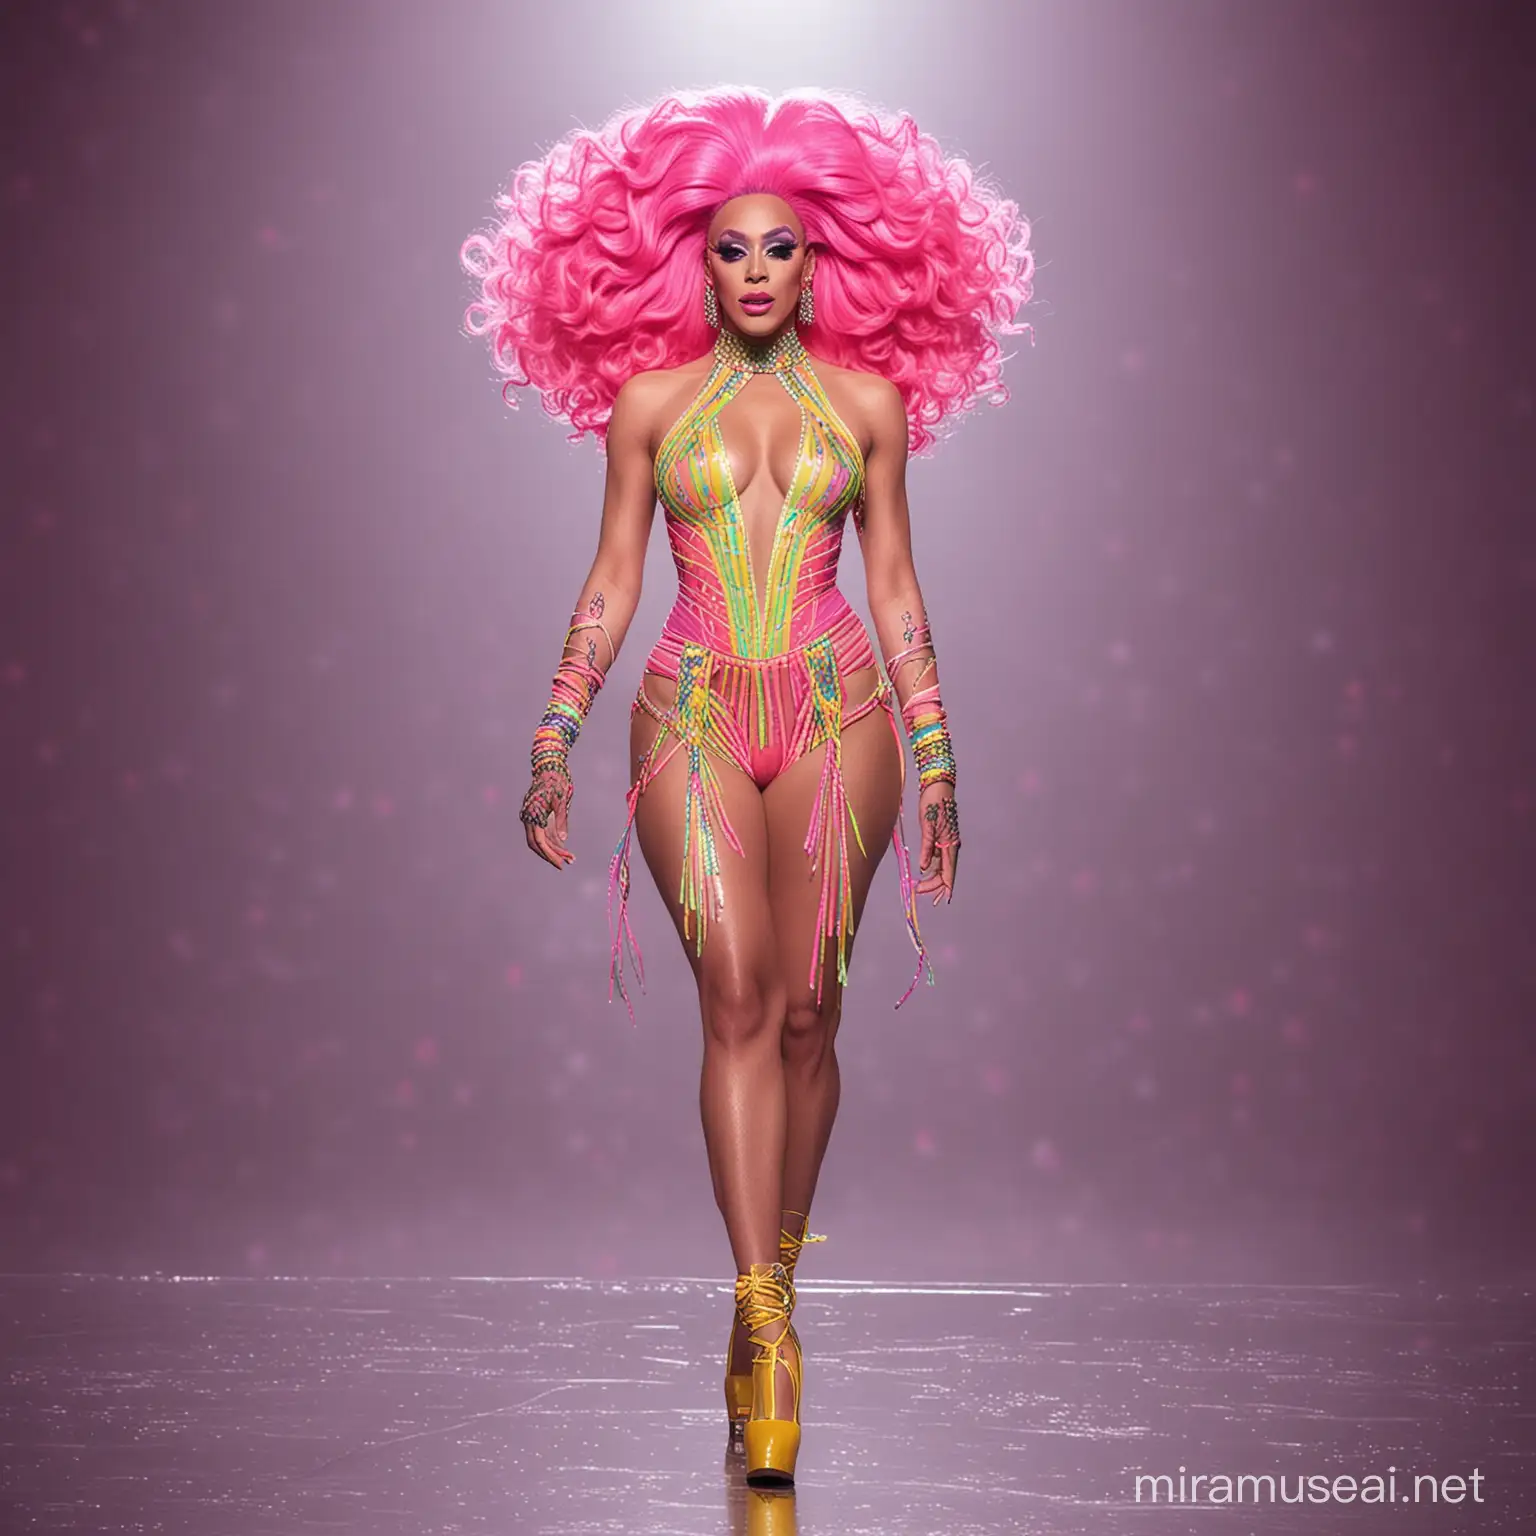 a full body image of a skinny brazilian neon drag queen walking on the Rupaul's Drag race runway wearing an outfit inspired by the prompt: hidden identity. her face is hidden by her outfit